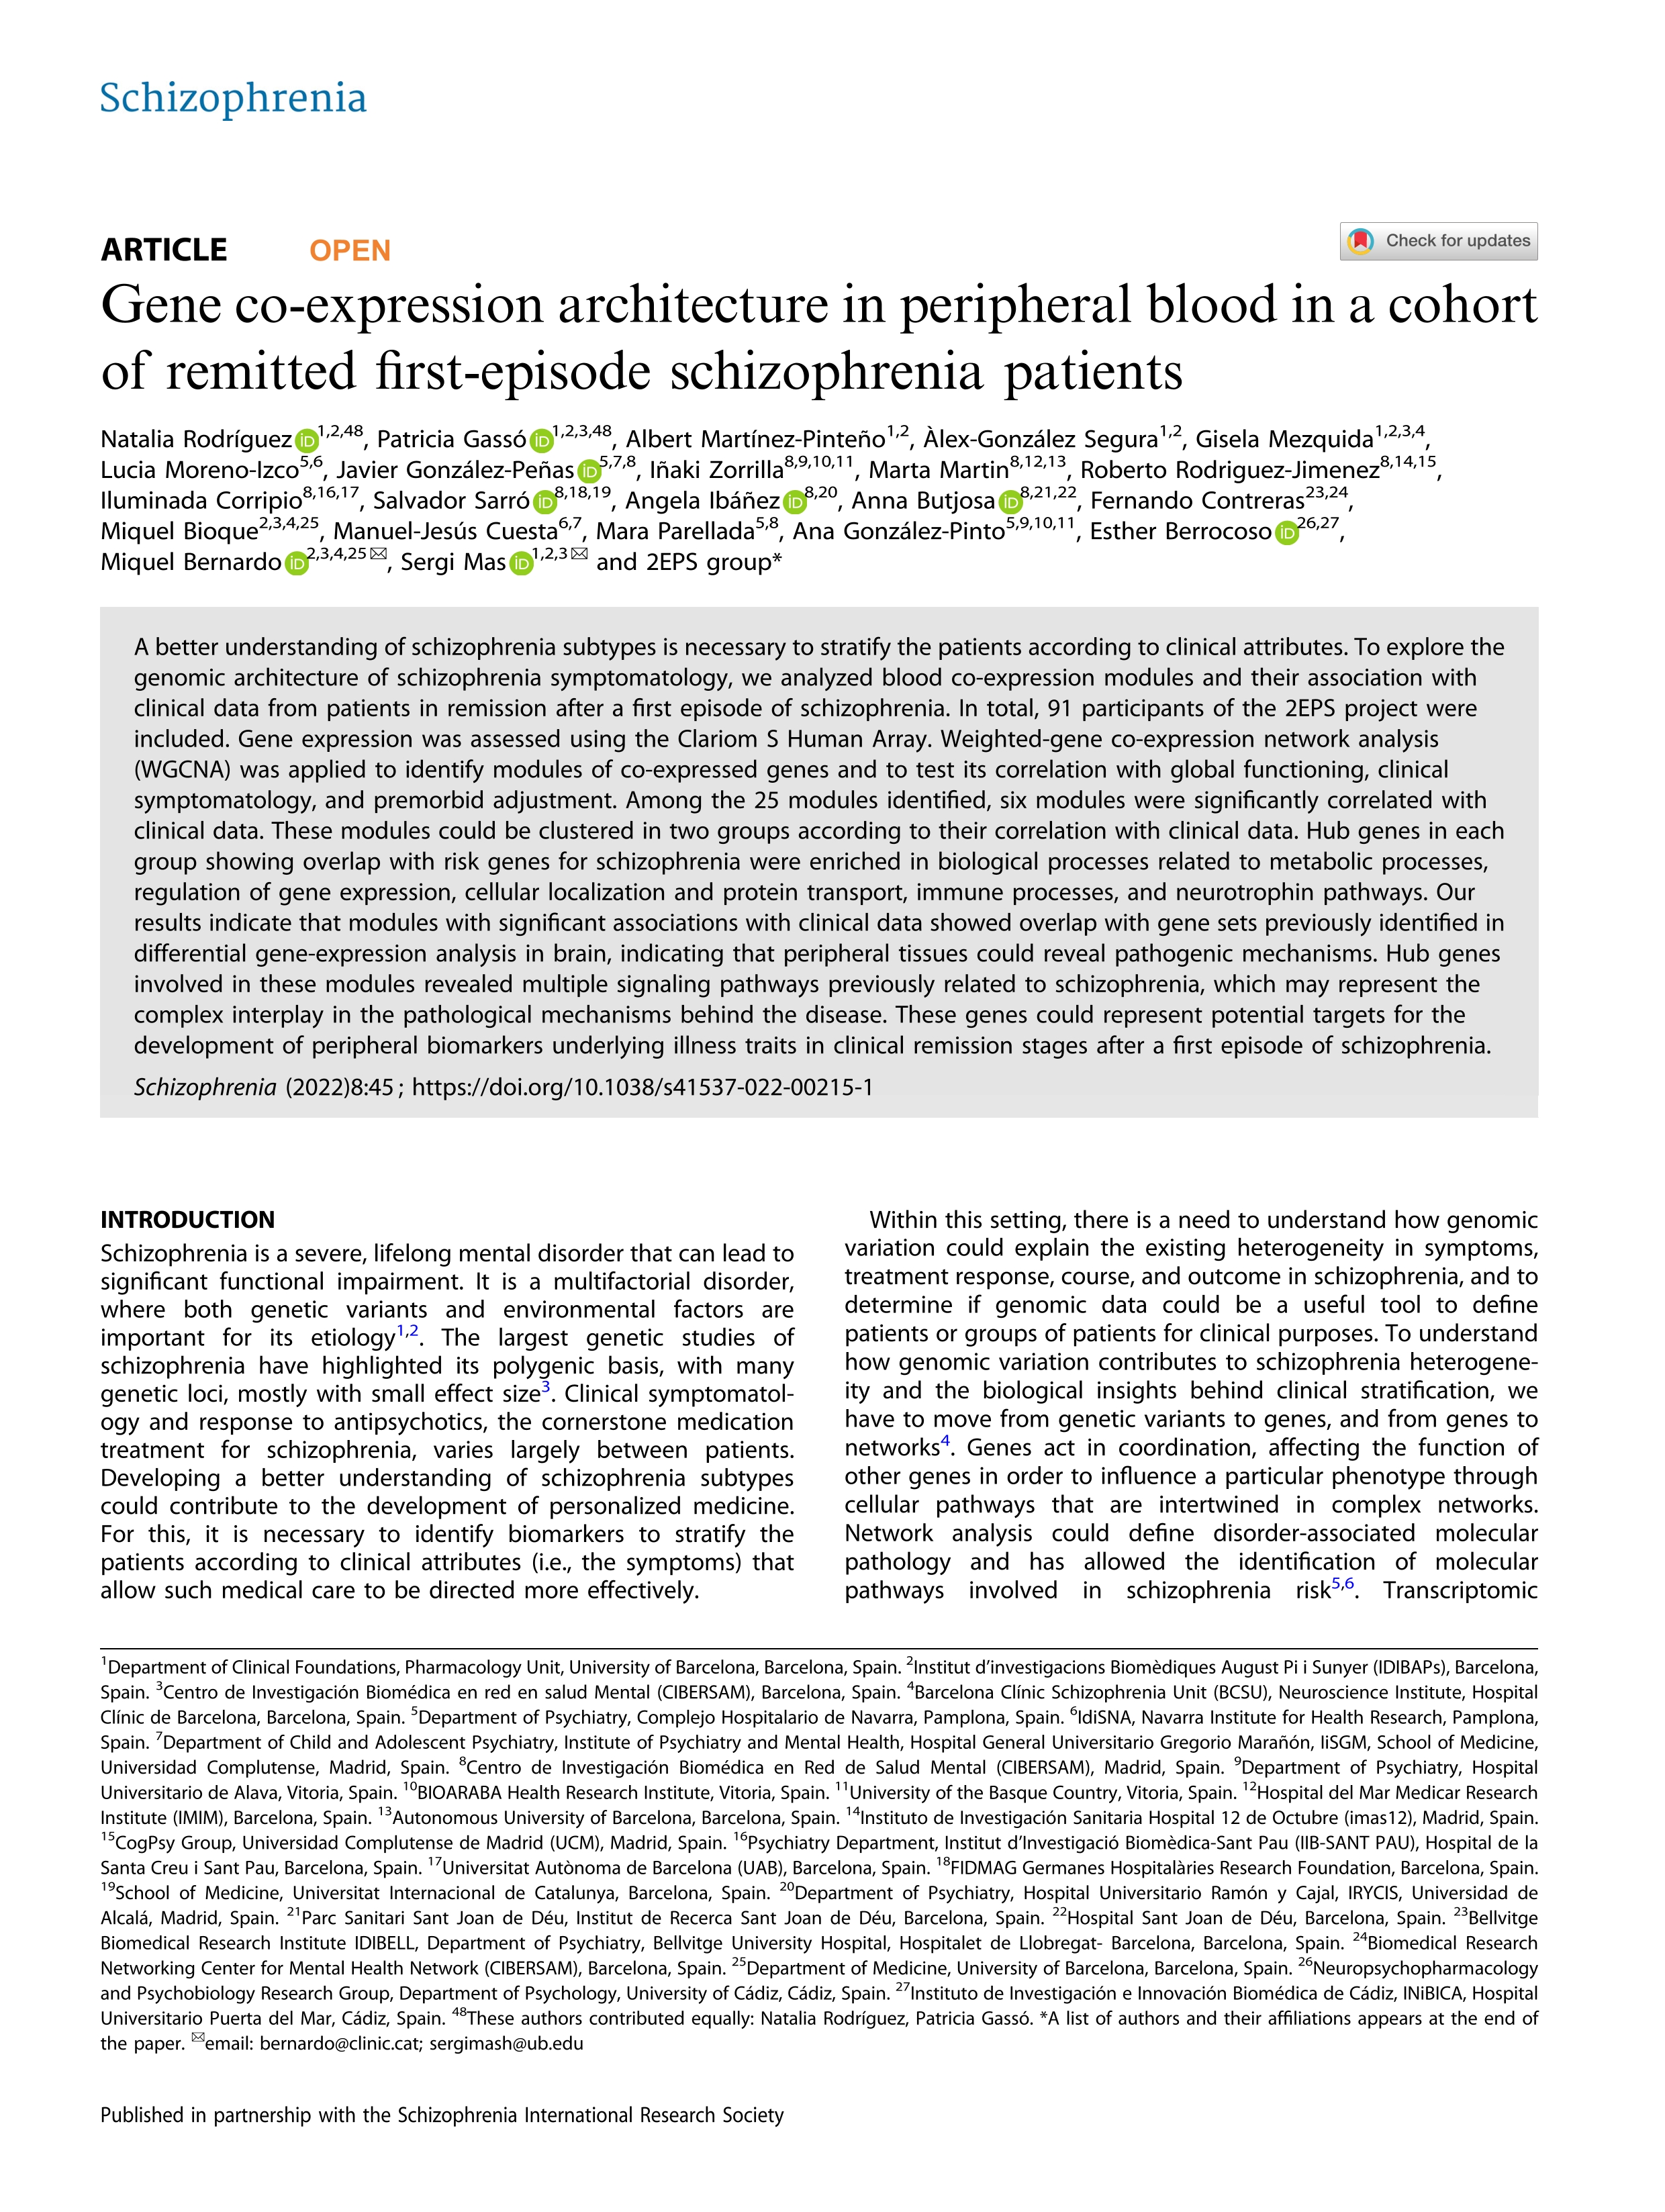 Gene co-expression architecture in peripheral blood in a cohort of remitted first-episode schizophrenia patients